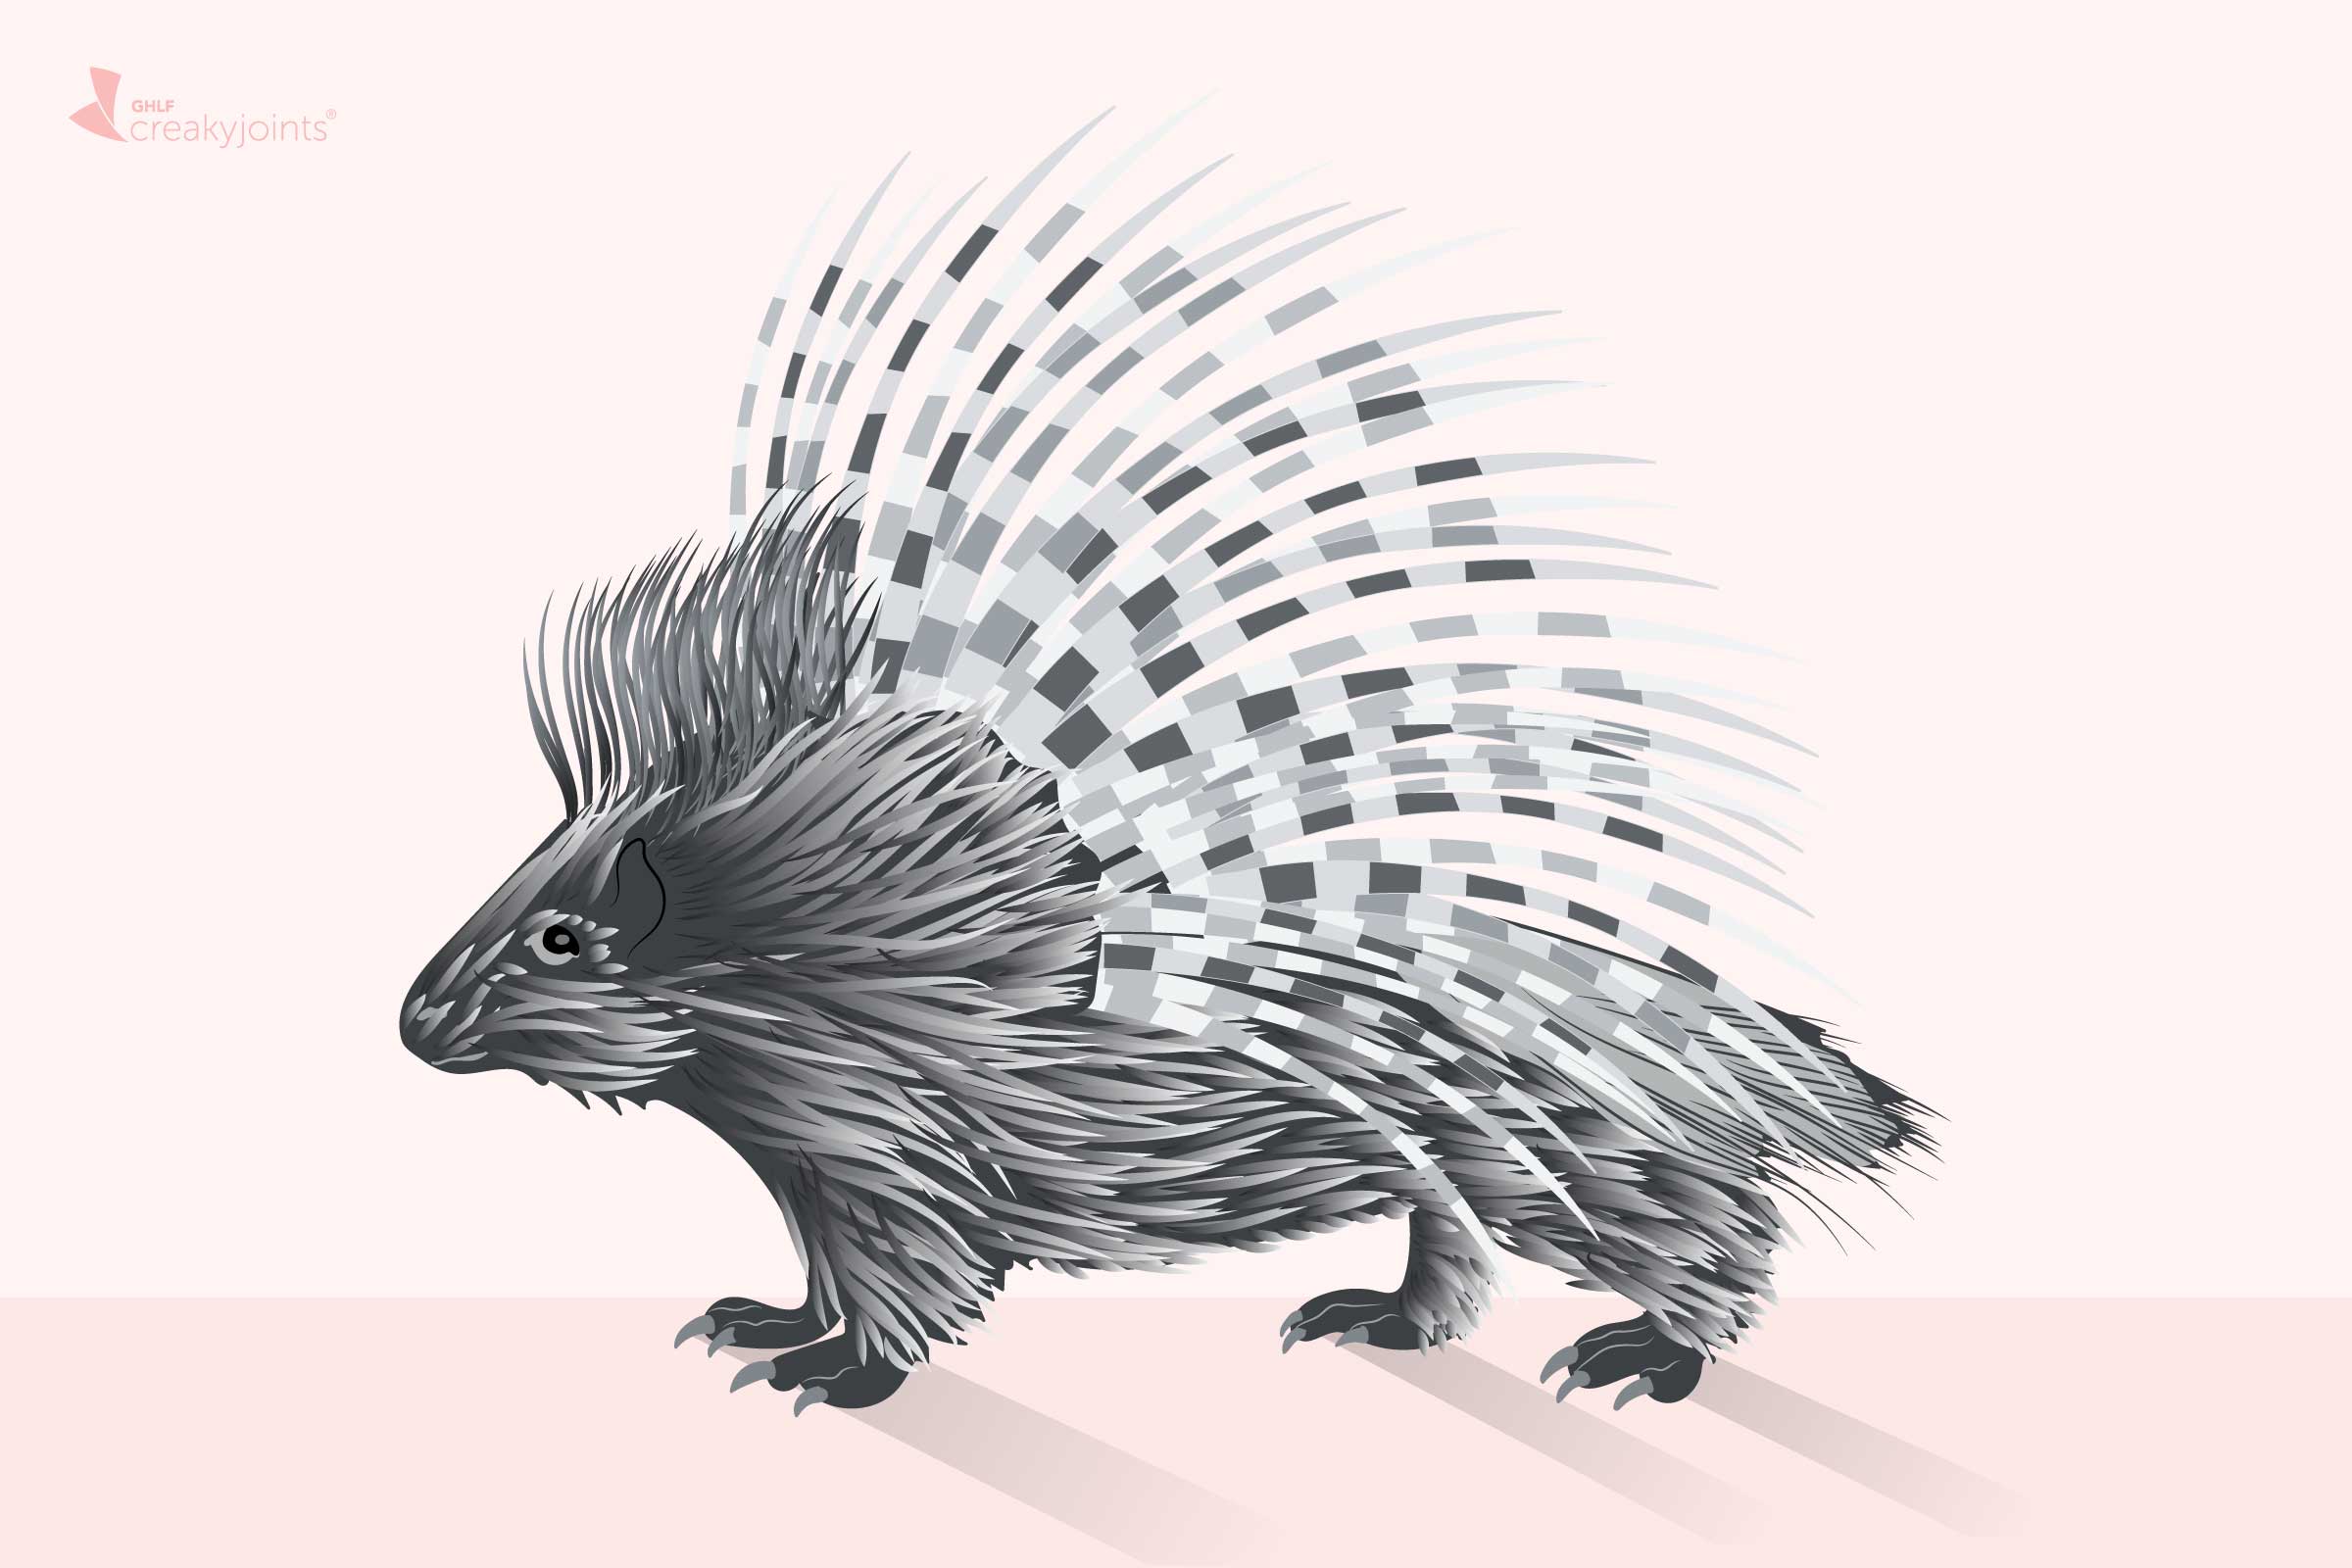 Just made someone's day with the Porcupine Badge